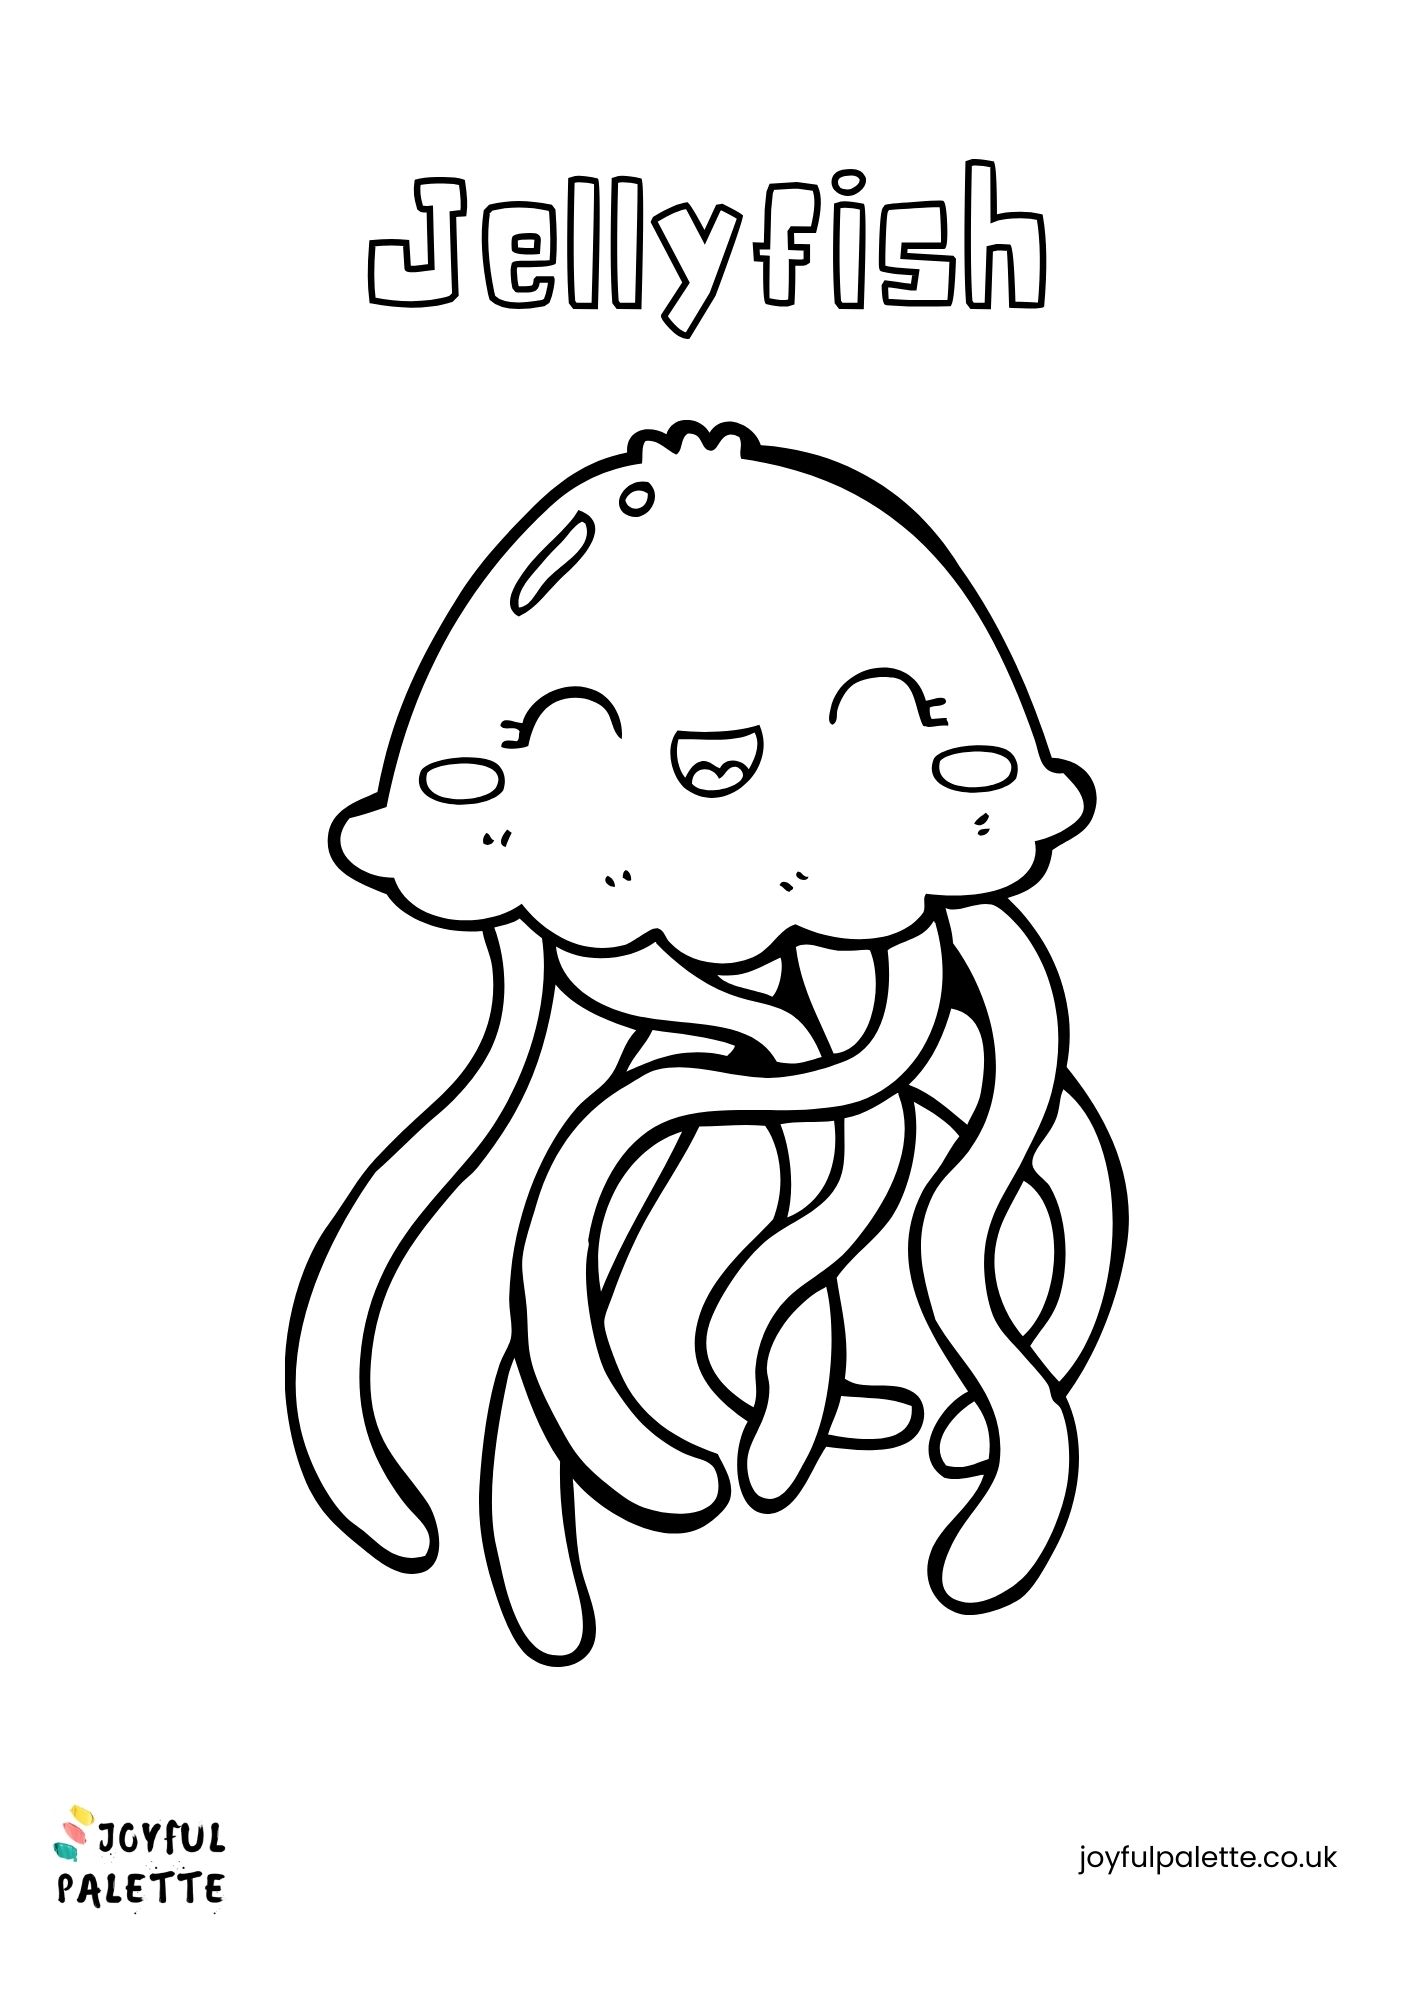 Cute Jellyfish Coloring Page